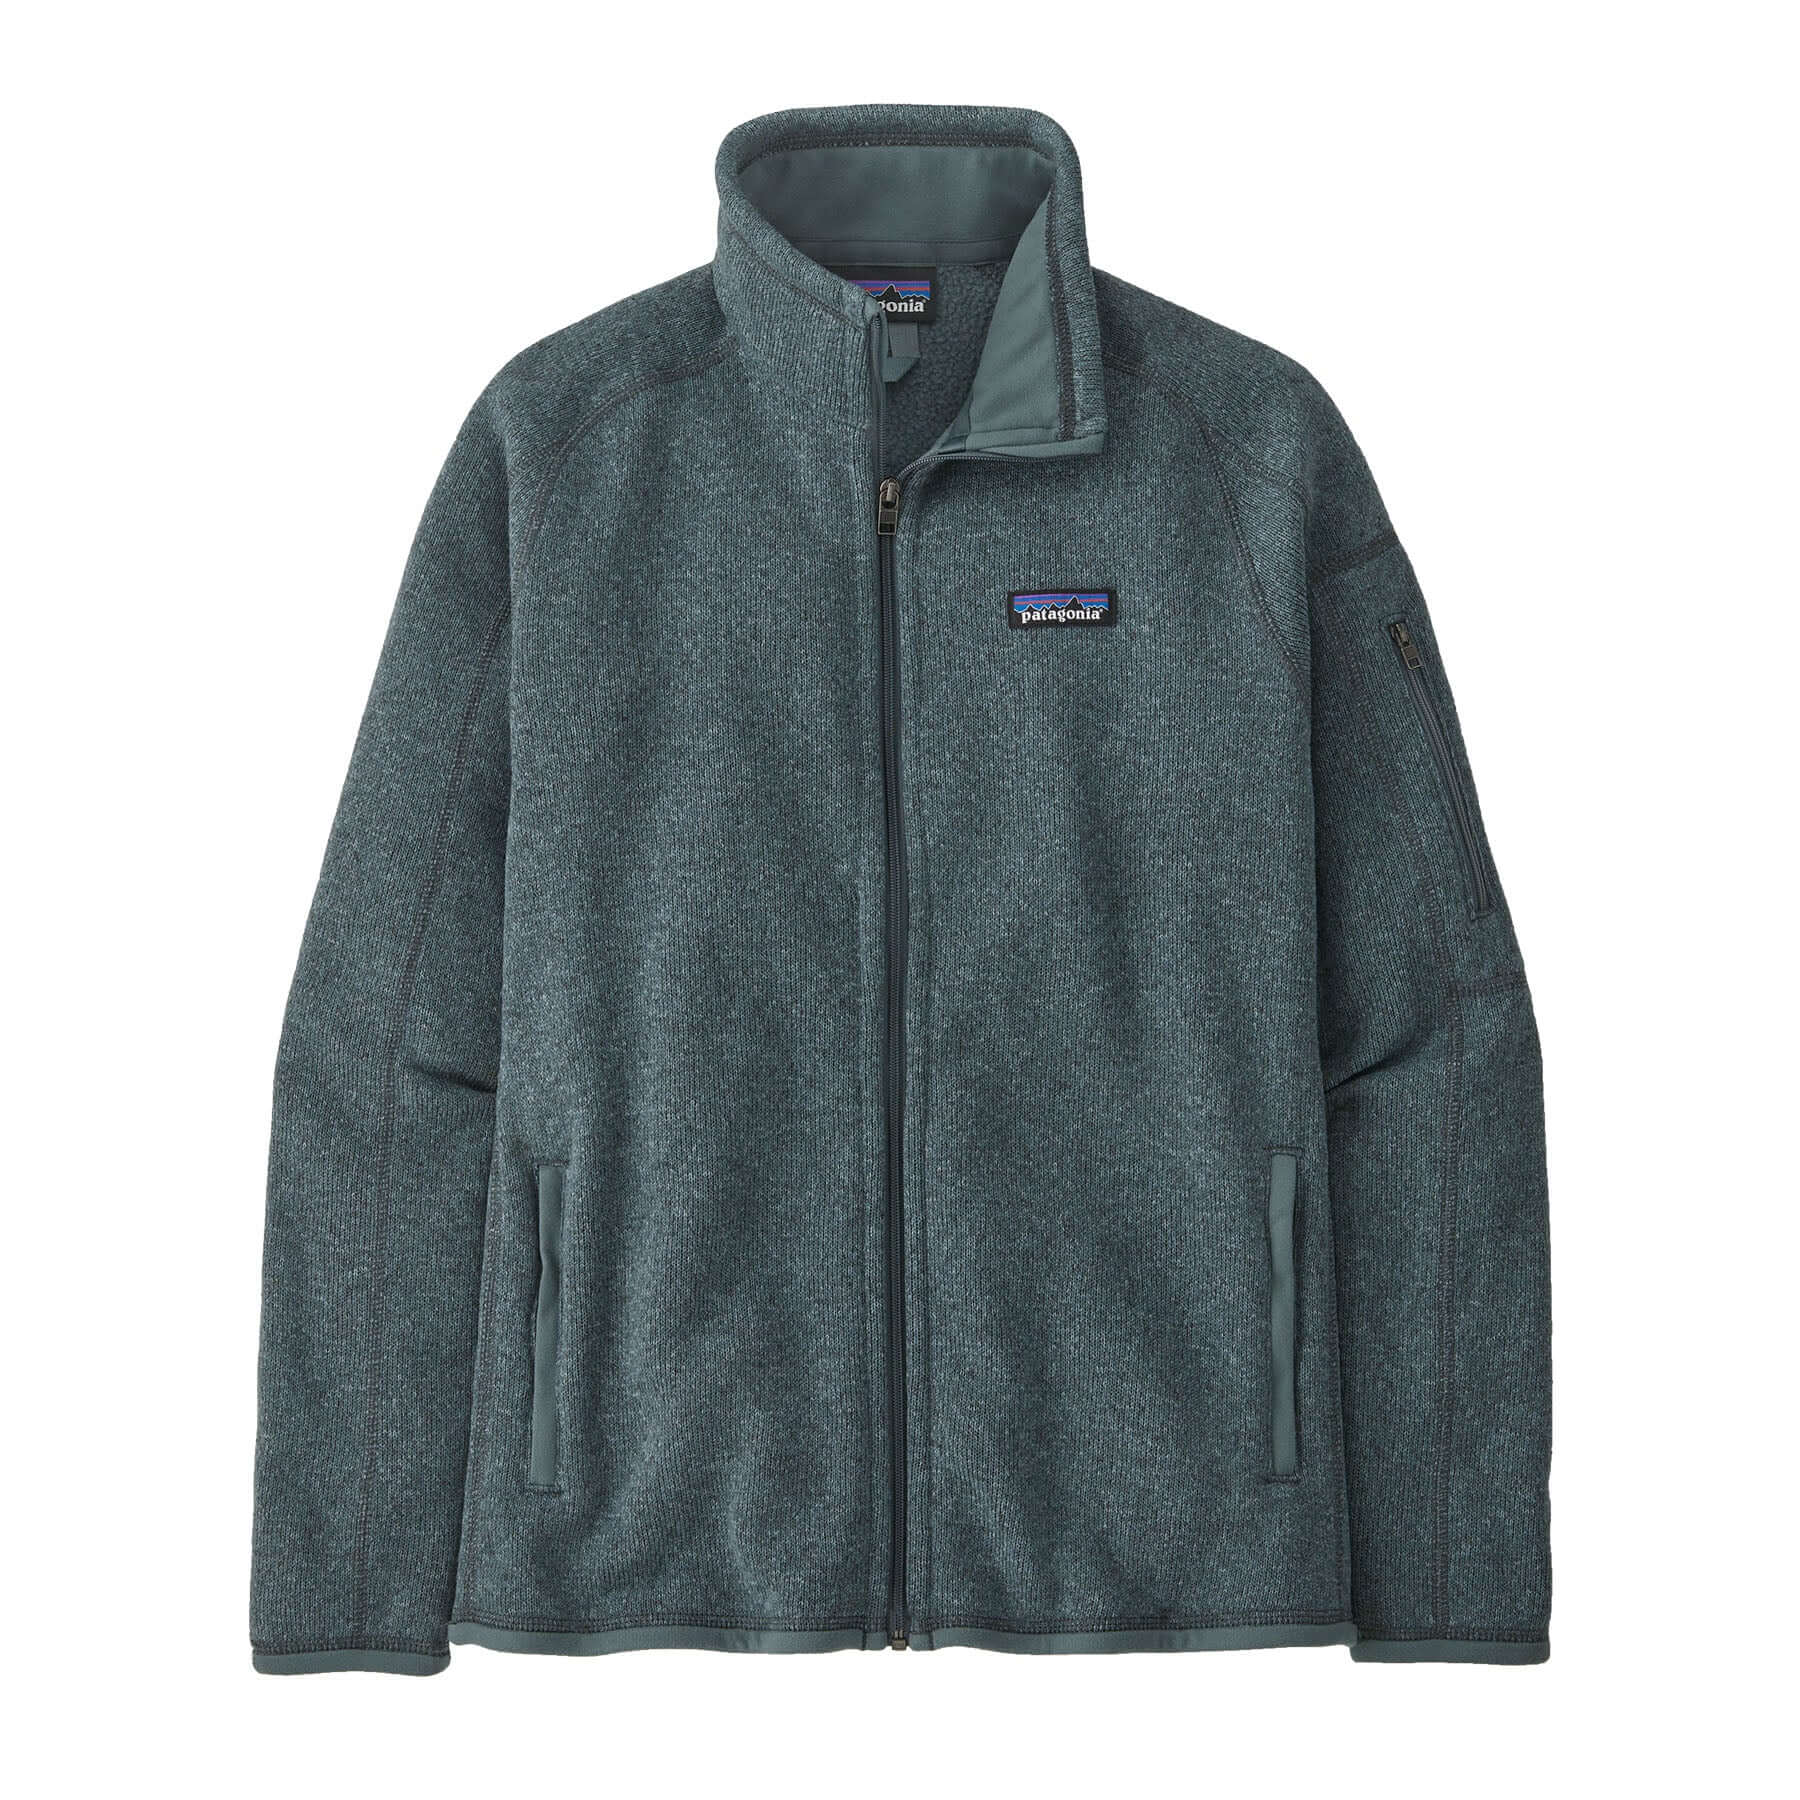 Women's Better Sweater Jacket in NOUVEAU GREEN | Patagonia Bend